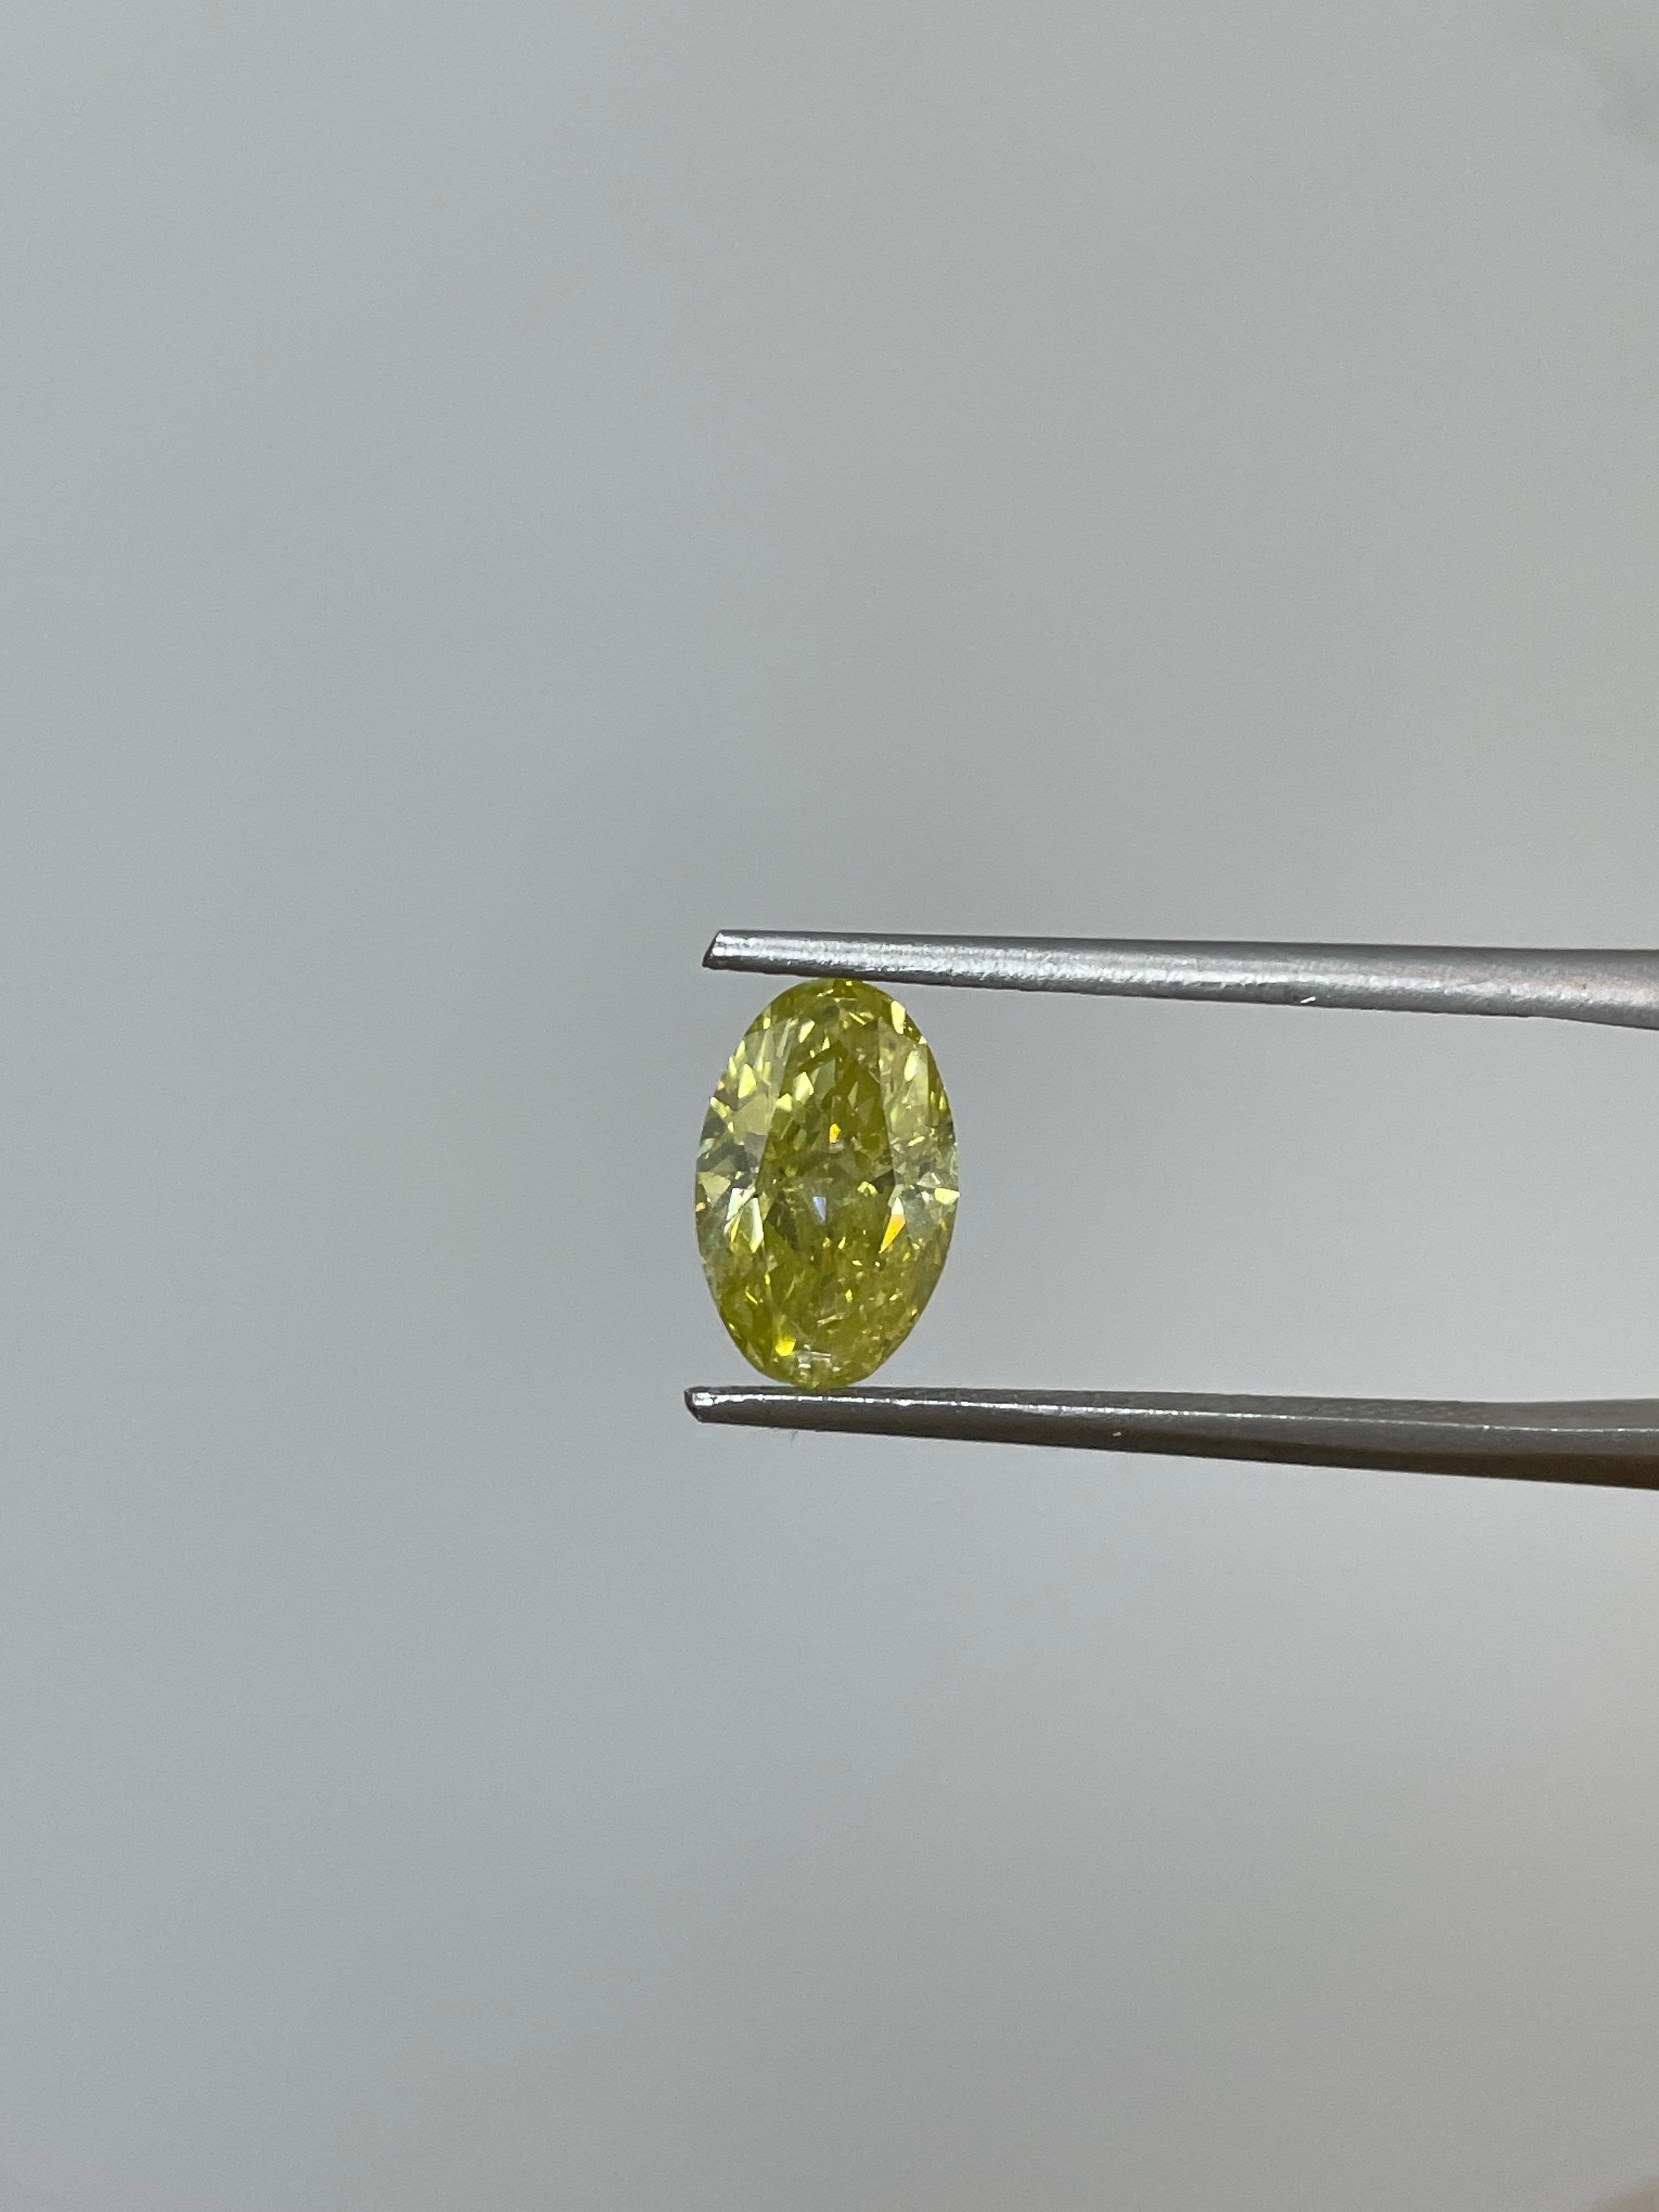 Brilliant Cut GIA Certified 1.69 Carat Oval Brilliant Fancy Intense Yellow I1 Natural Diamond For Sale